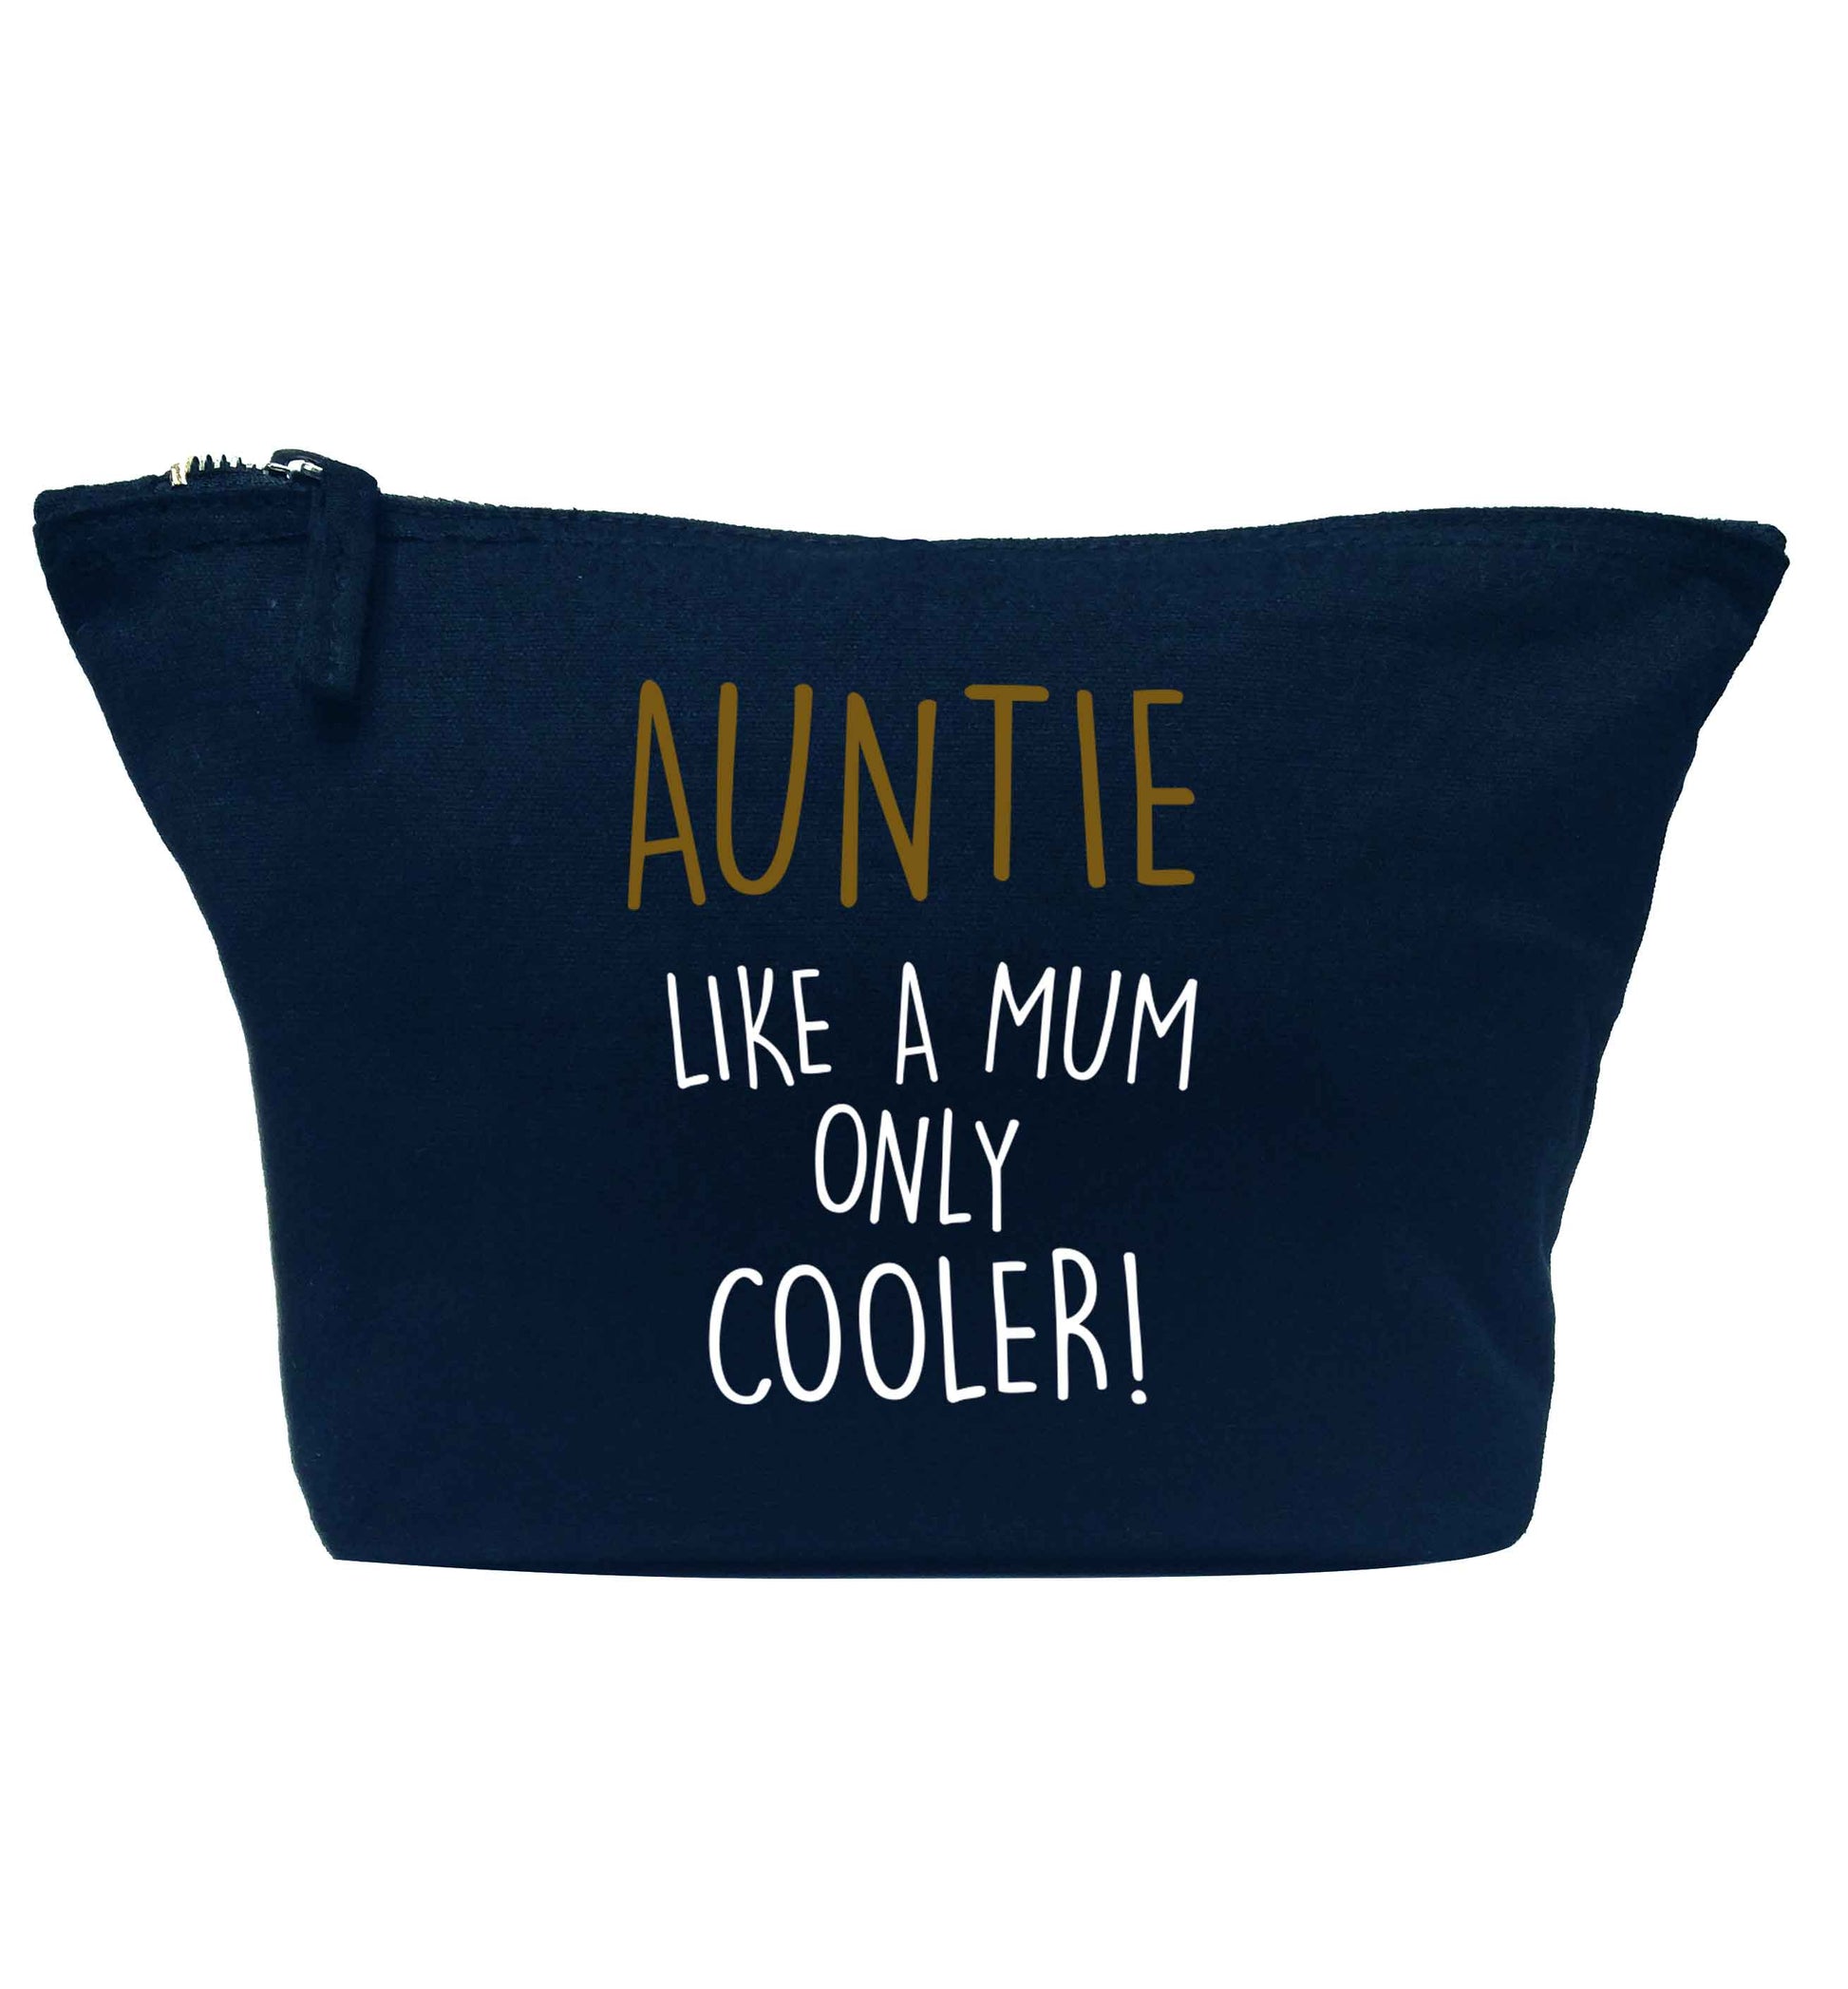 Auntie like a mum only cooler navy makeup bag